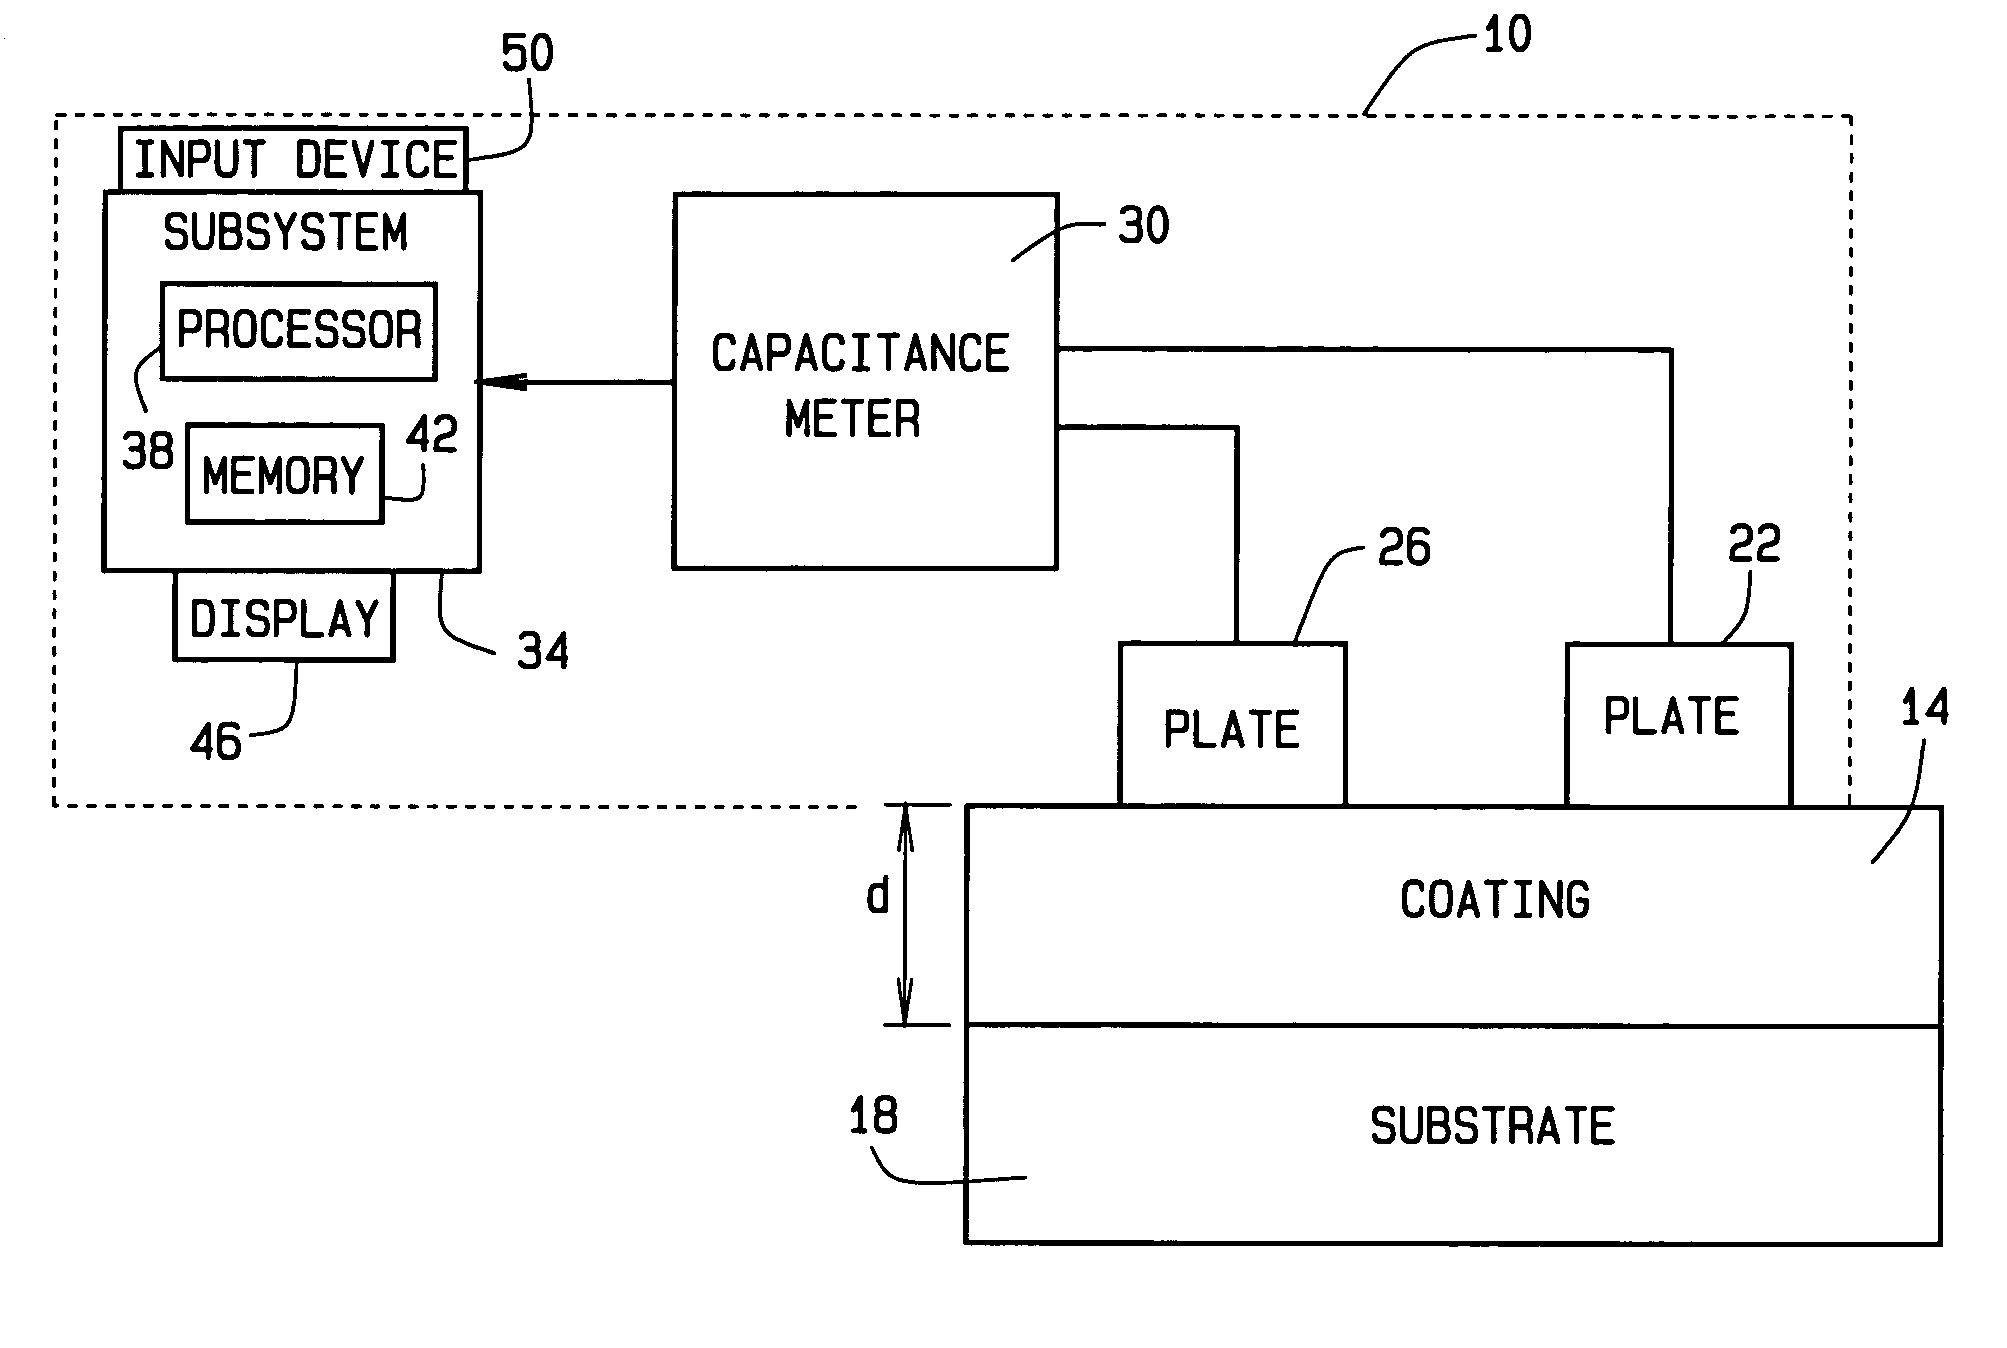 Measurement of a coating on a composite using capacitance